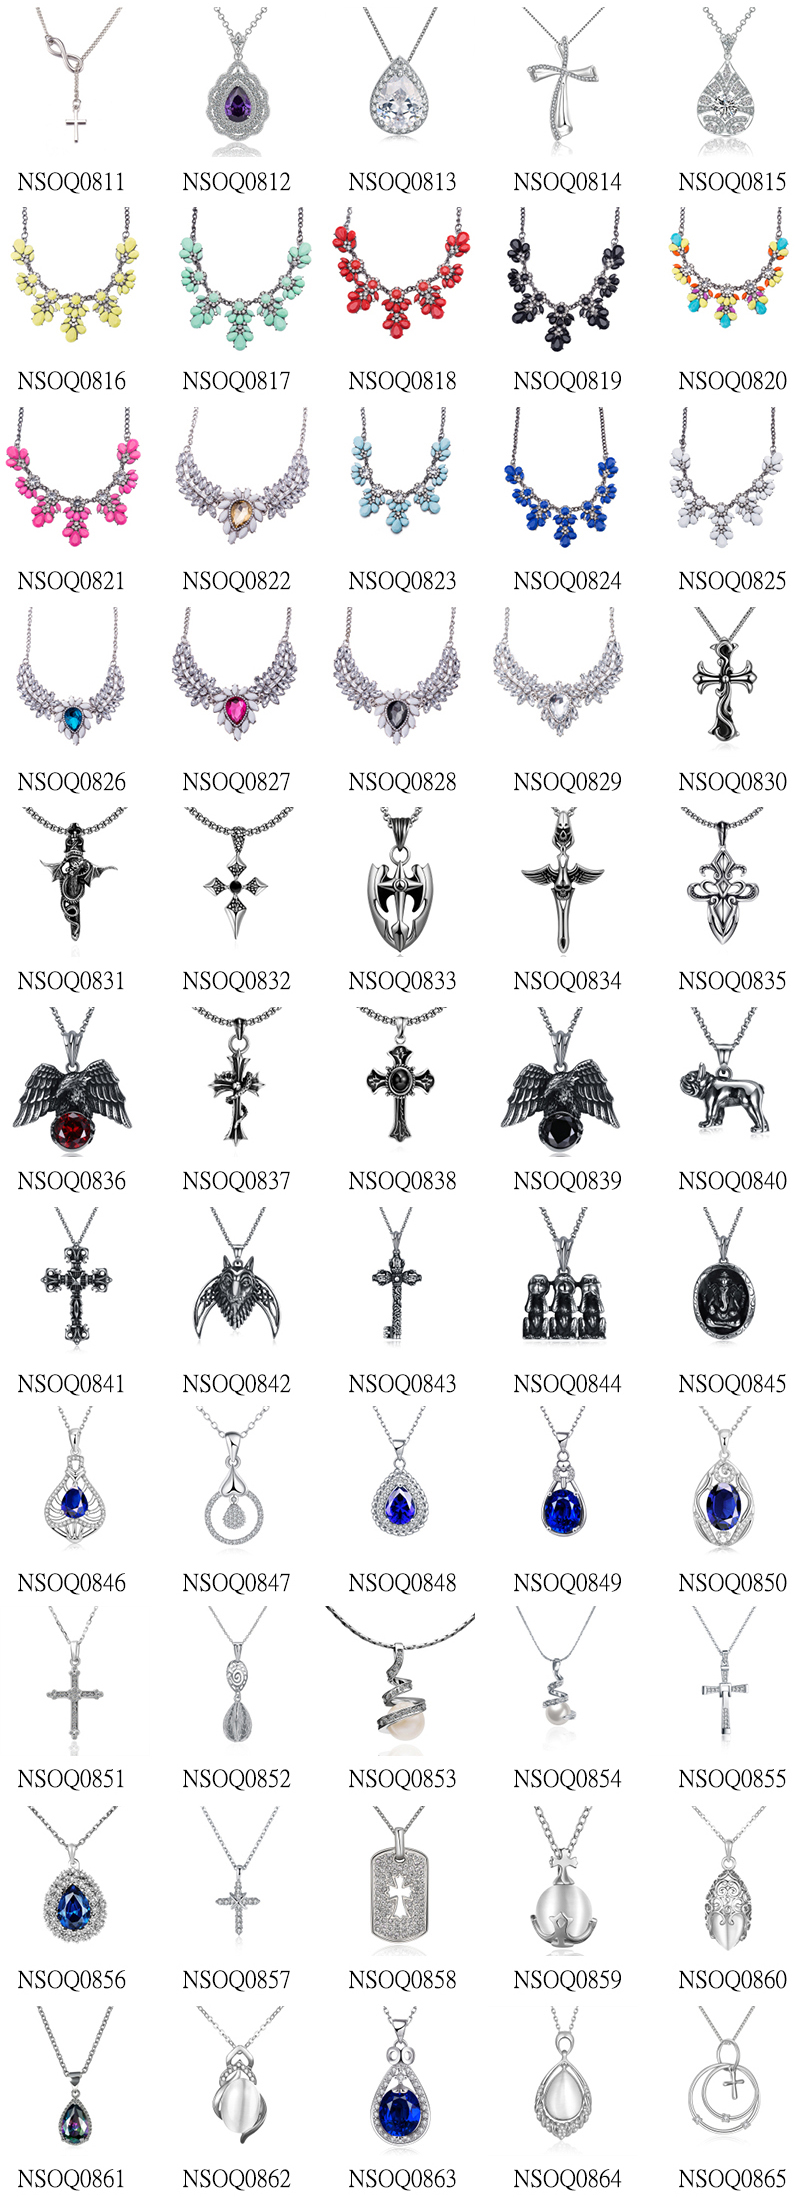 255 Vintage Cross Pendant Necklaces and Custom Animal Necklaces You Need to Know